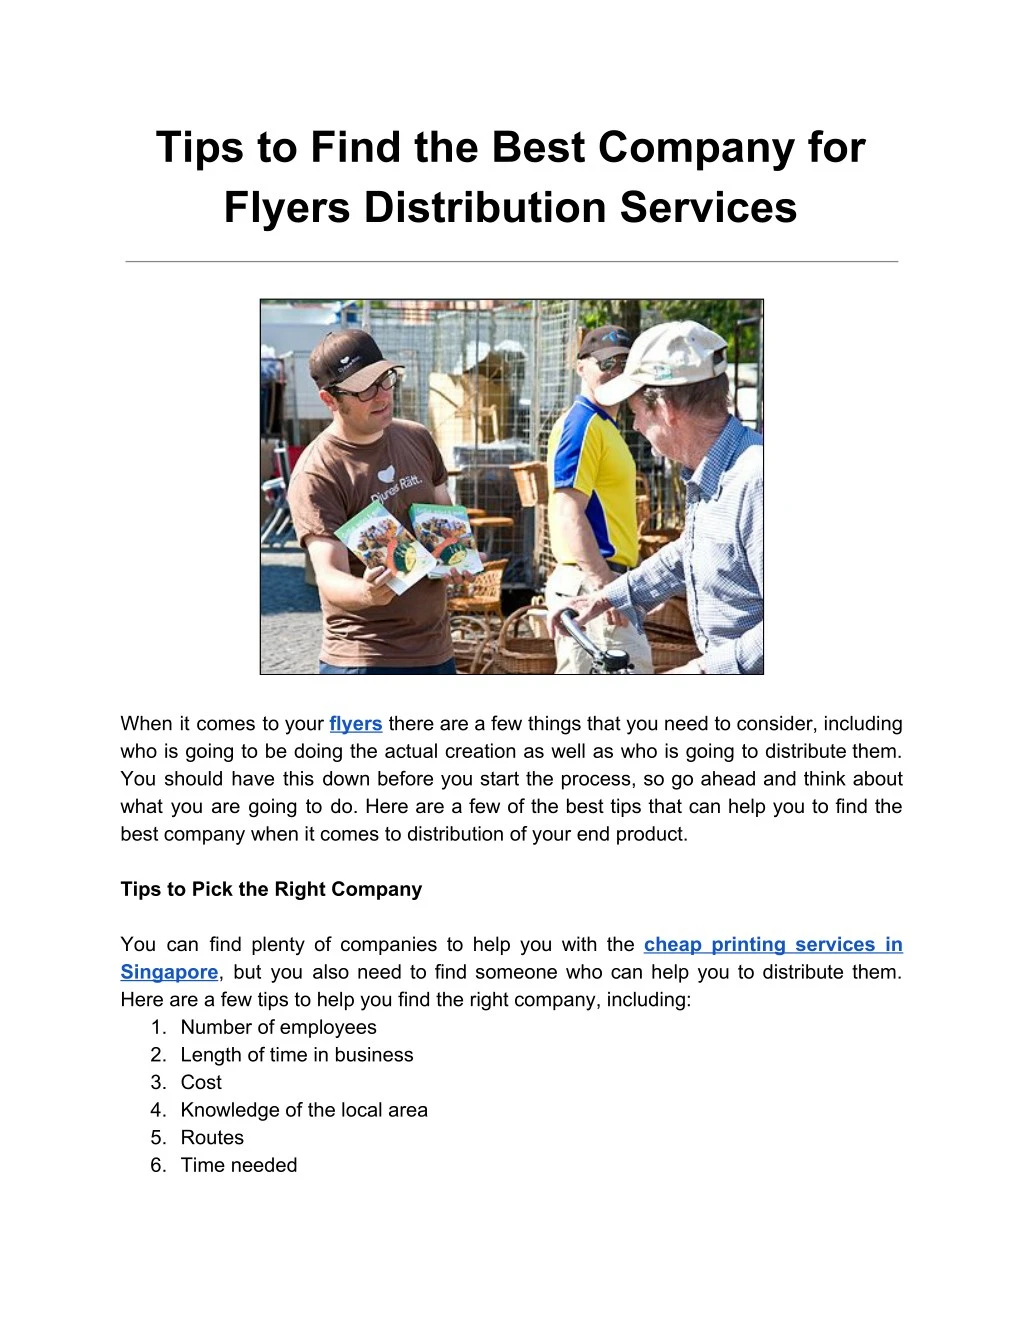 tips to find the best company for flyers